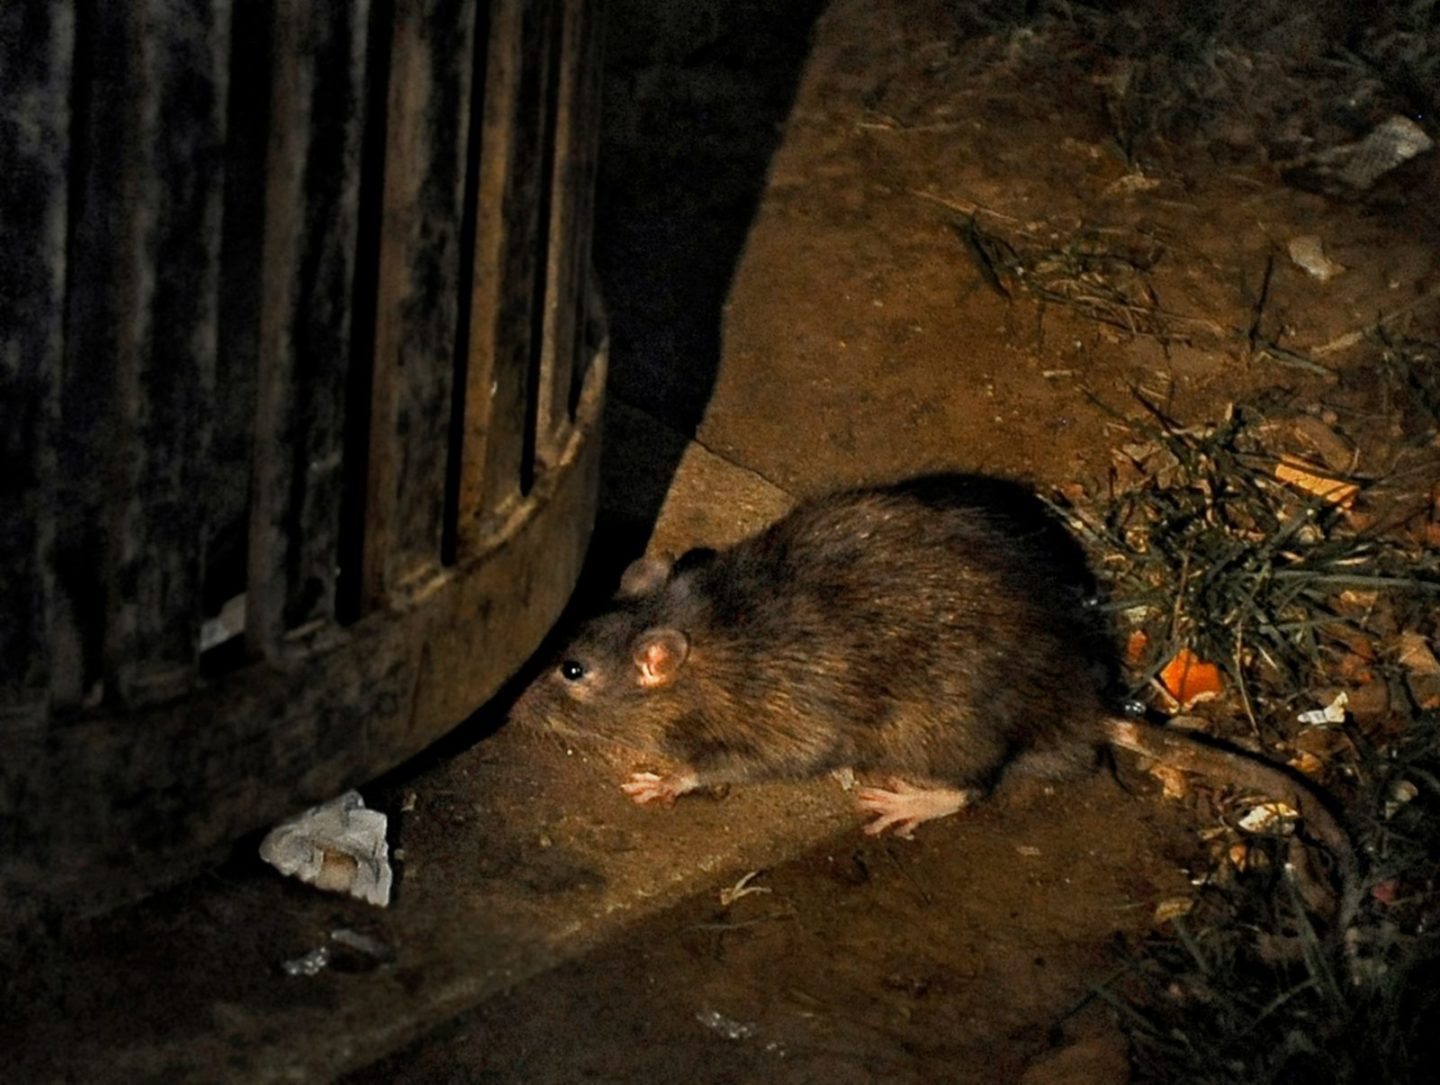 norway rat by garbage can